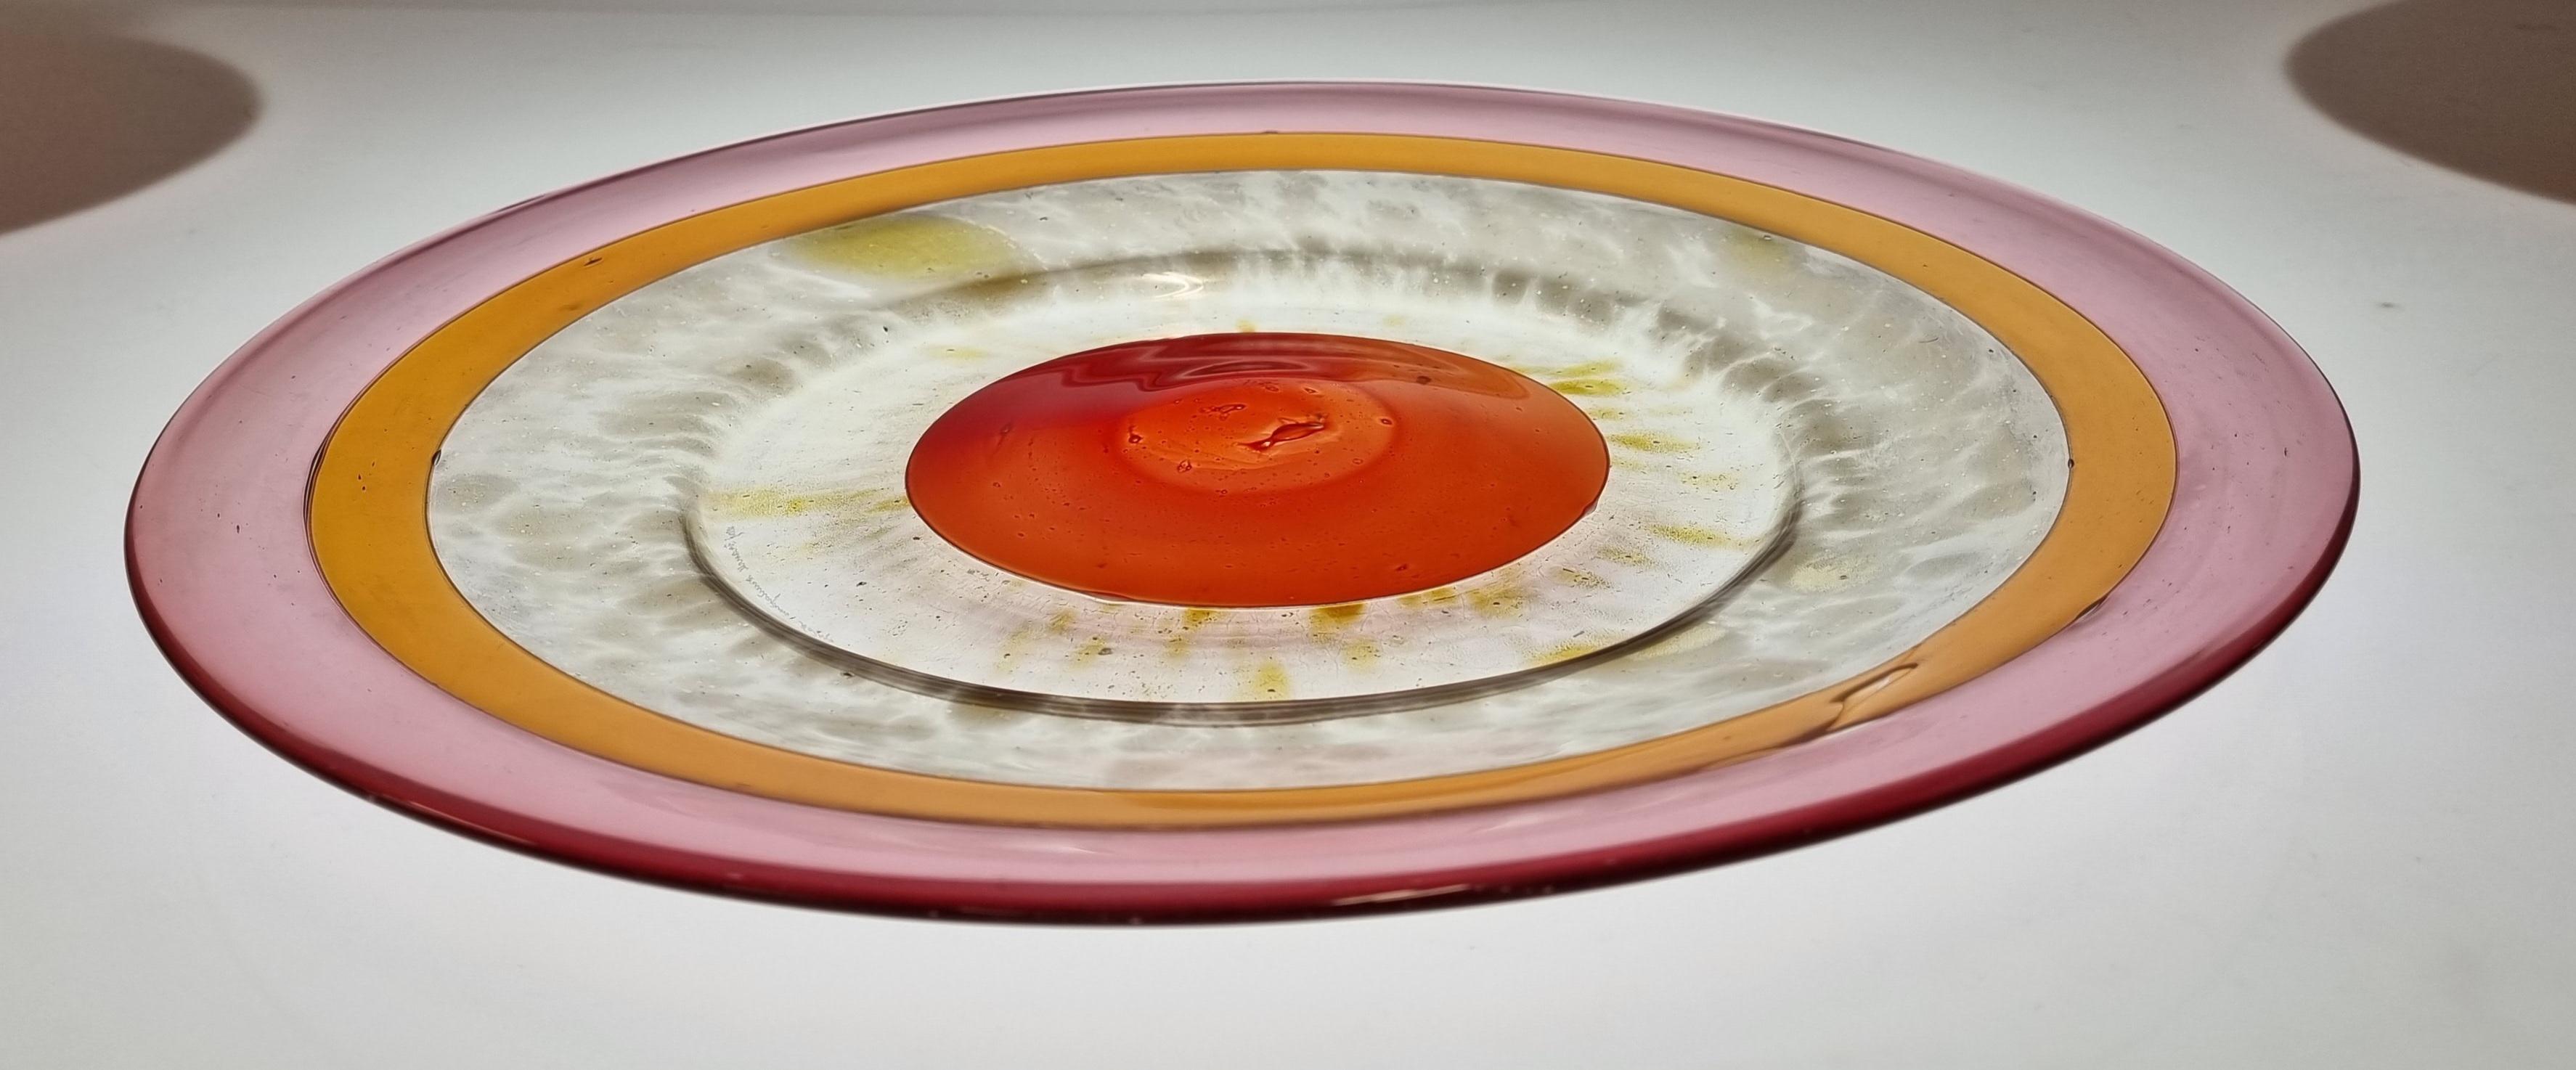 A lovely decorative dish designed by the renowned Kaj Franck. This very colorful design full of red, orange and purple tones blends them all together and creates a vibrant playful vibe. A very simple yet eye catching piece that can bring a whole